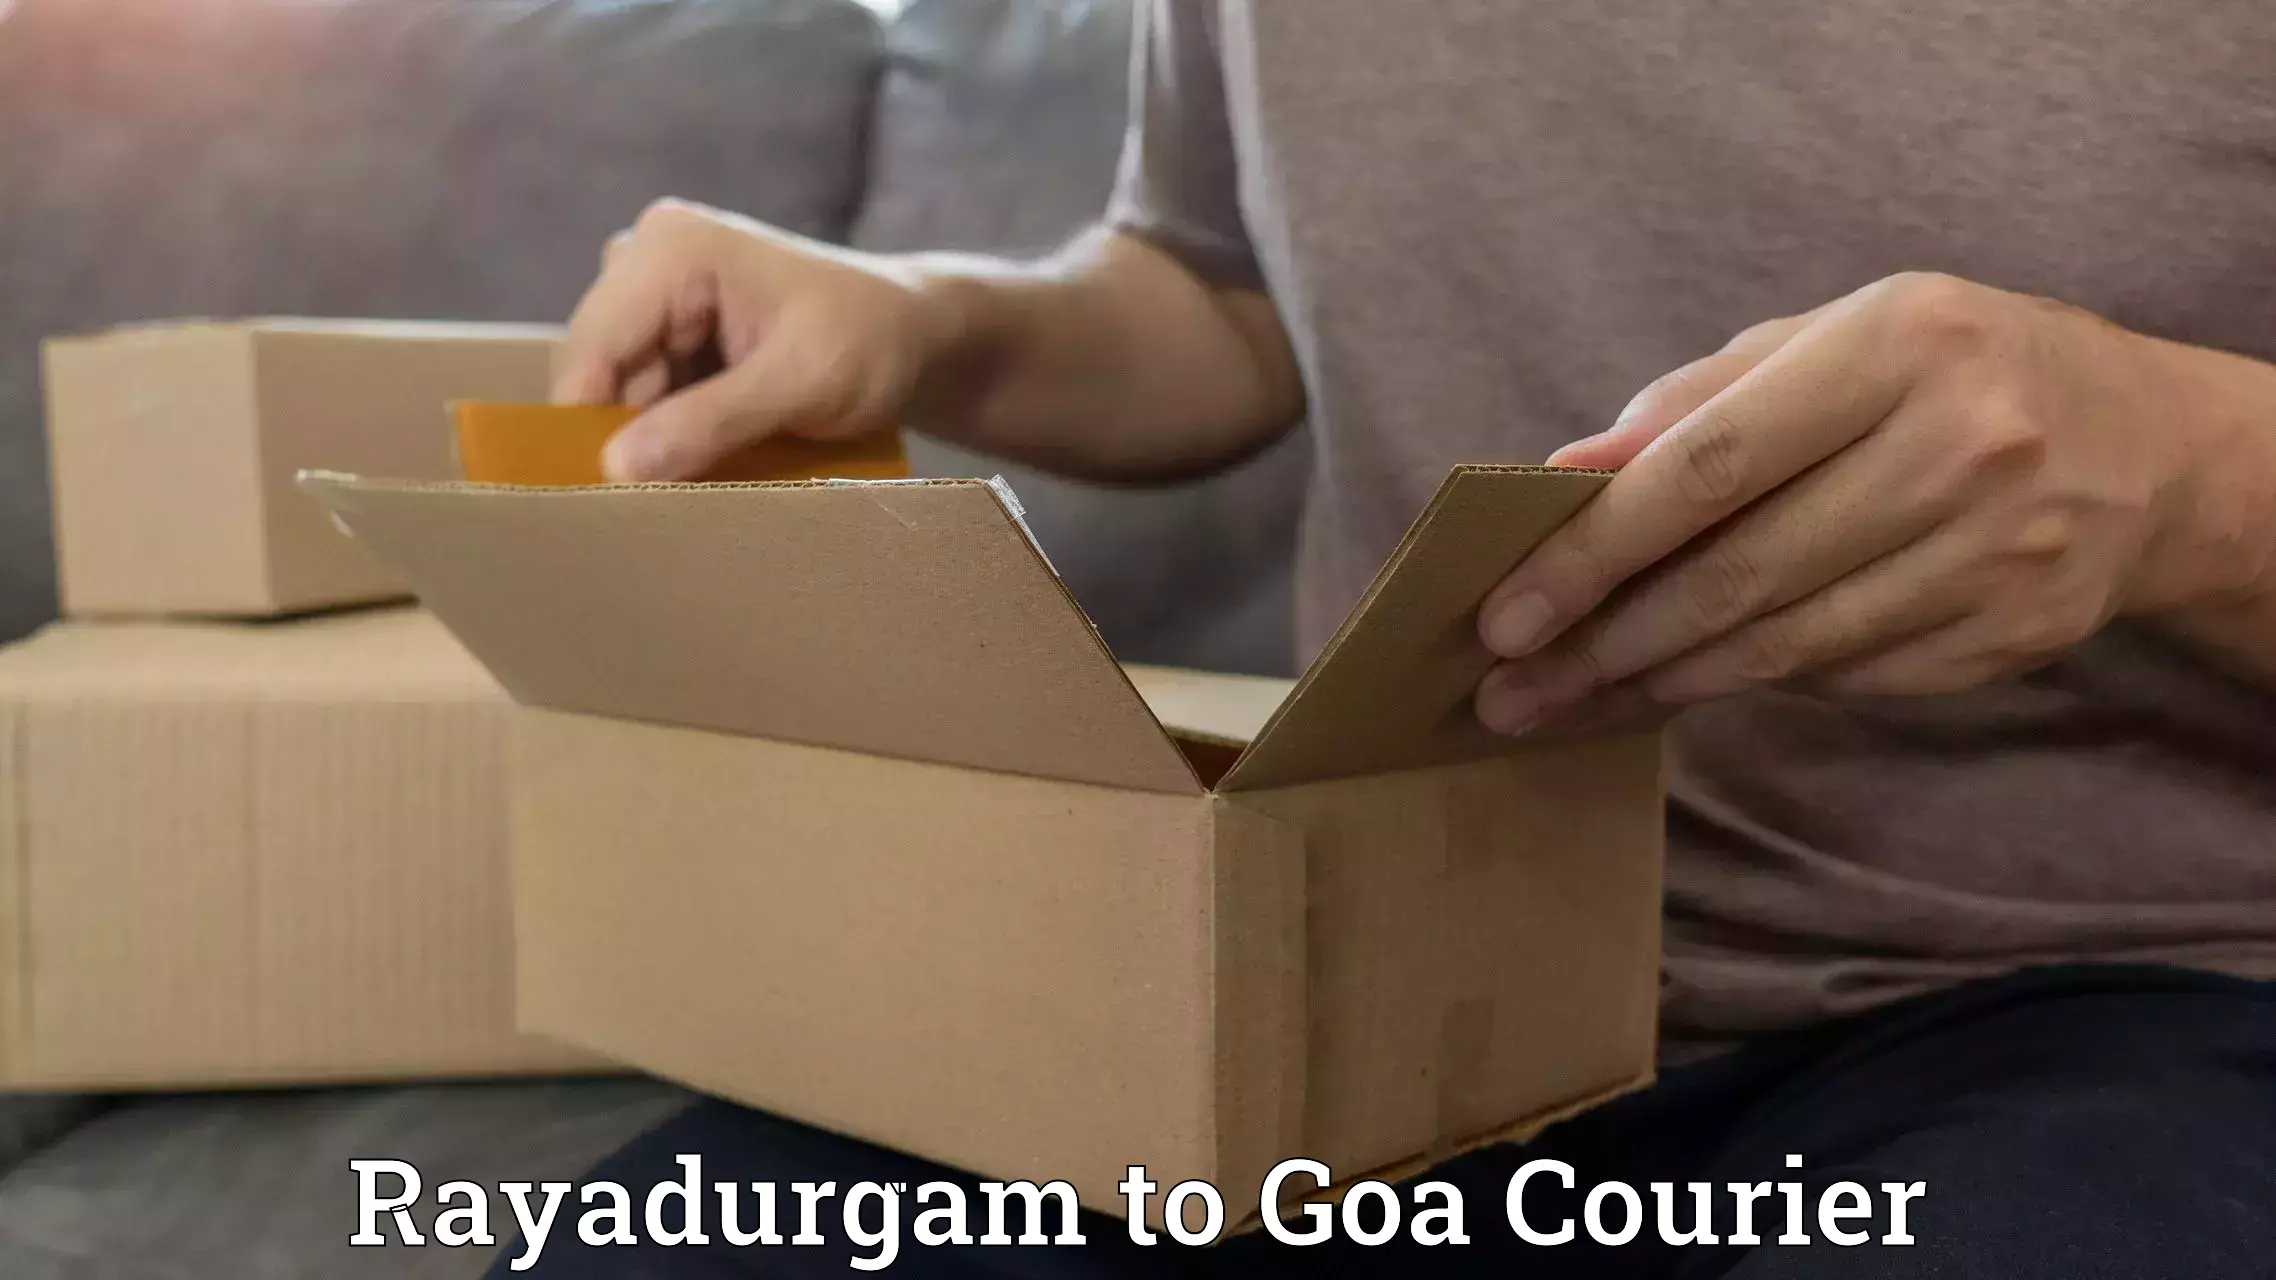 Courier service booking Rayadurgam to Margao